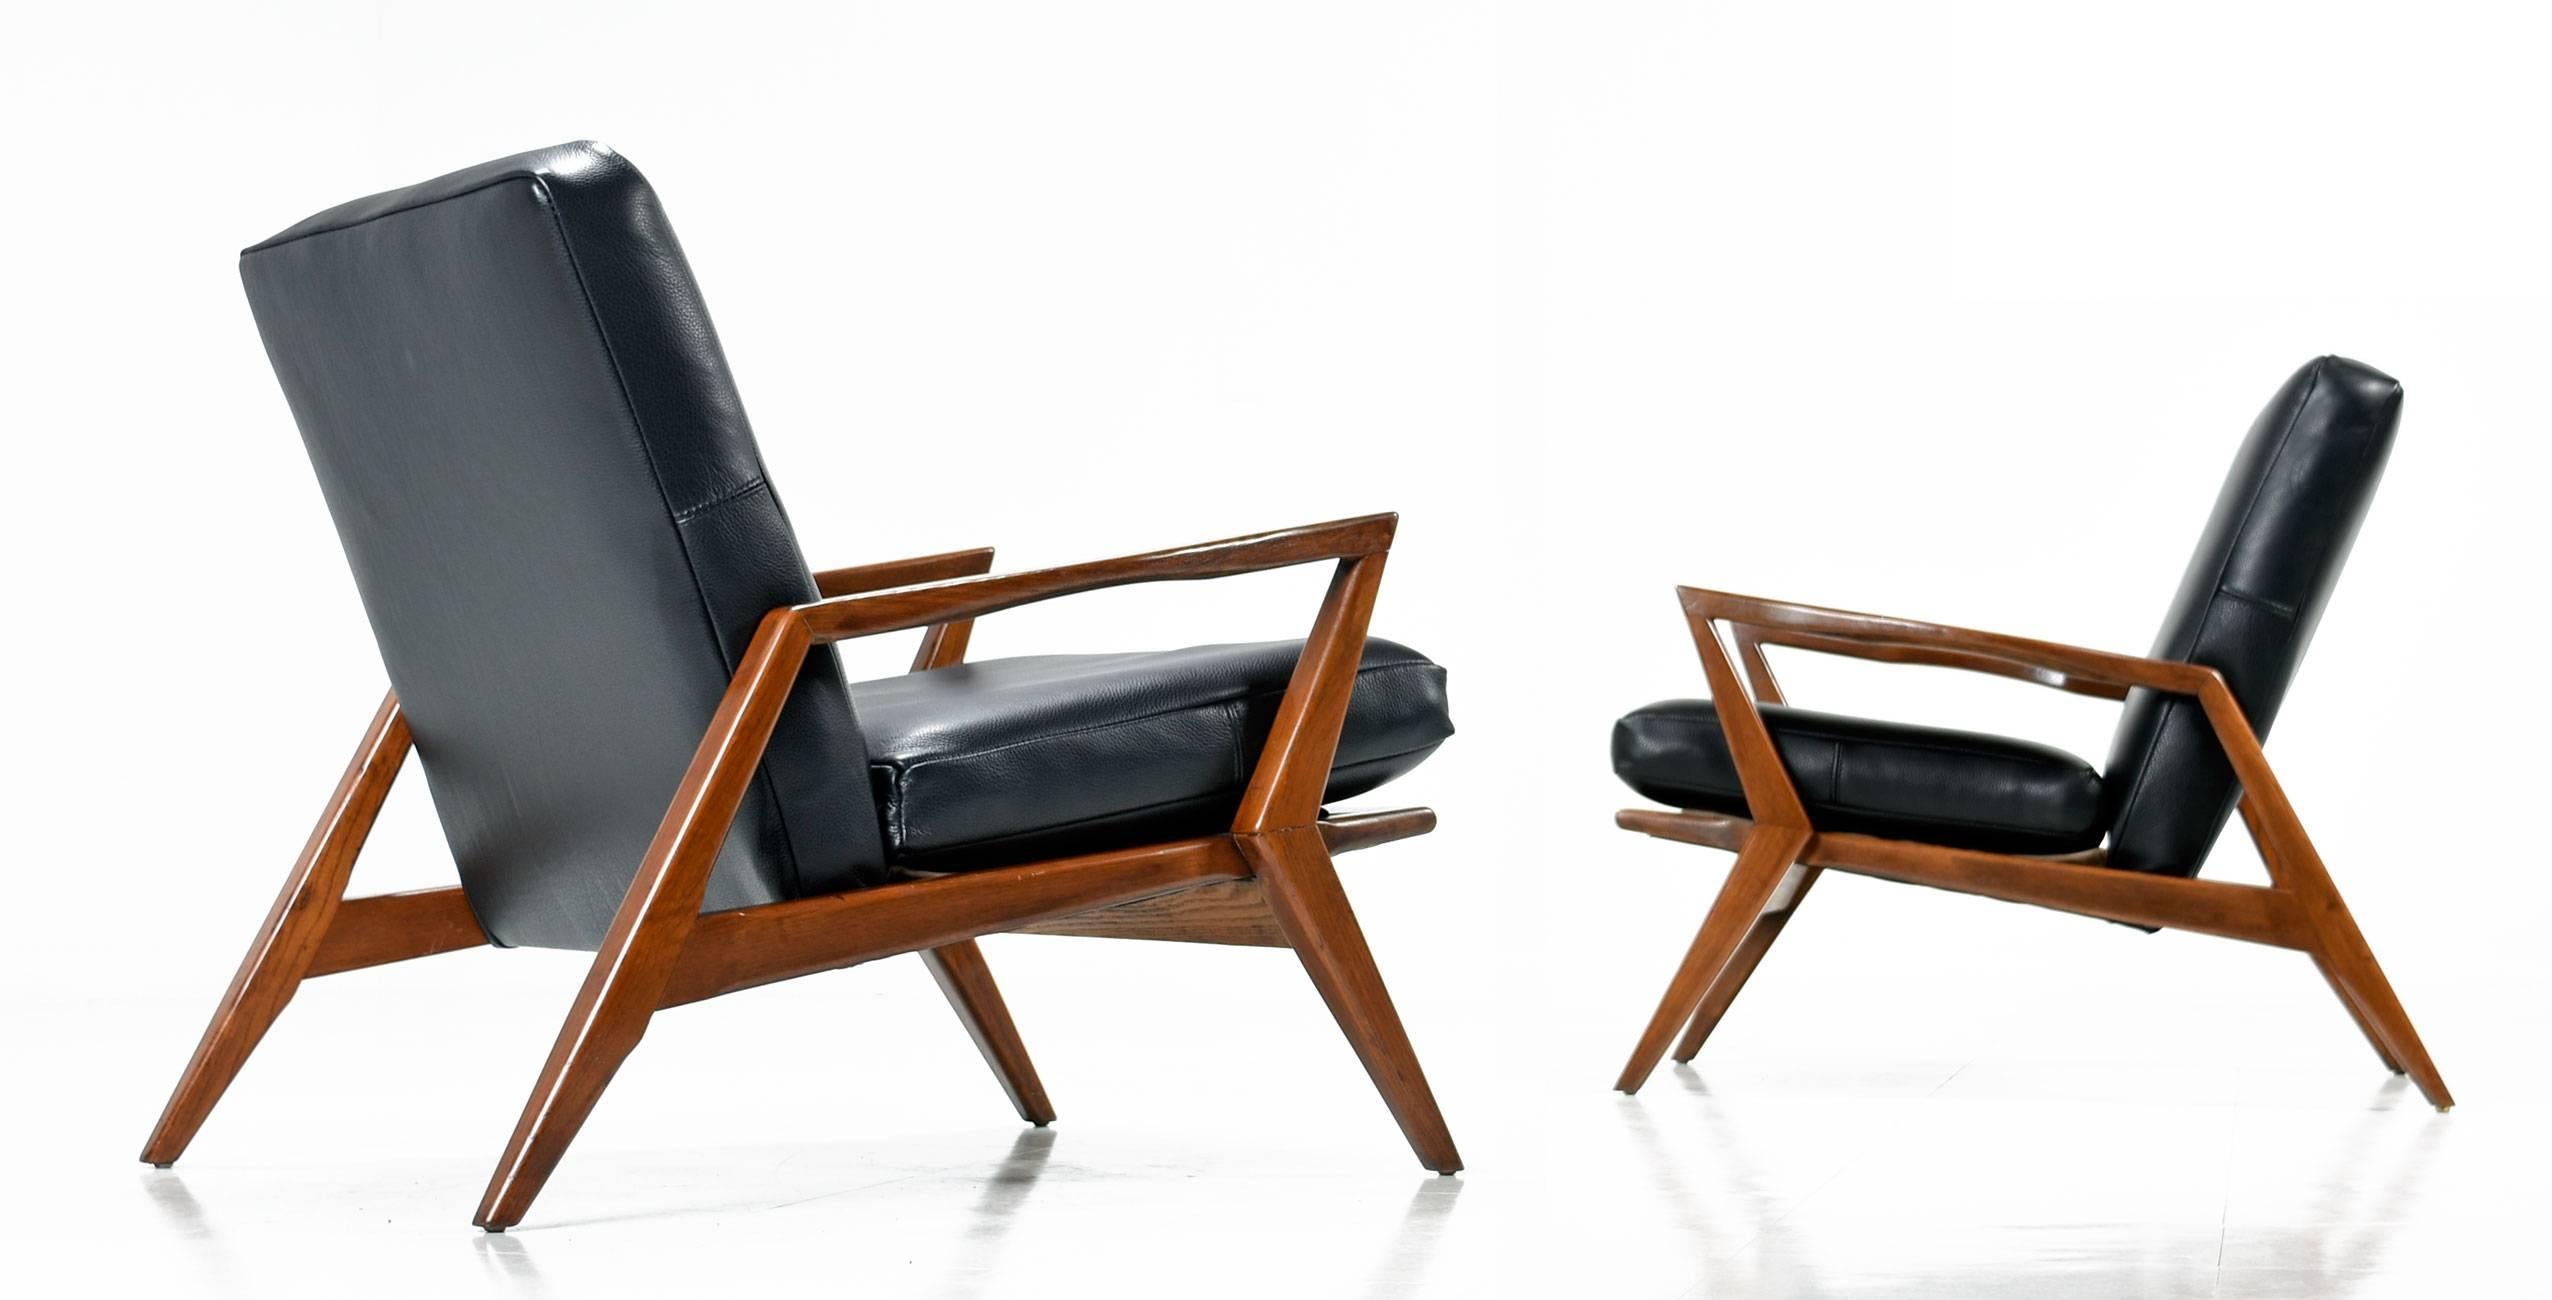 Stunning pair of Mid-Century Modern armchairs restored in new full grain black leather upholstery. American made, vintage 1960s, this handsome pair cuts a wicked Silhouette with the sharply angled "Z" shaped arms and legs. The solid walnut